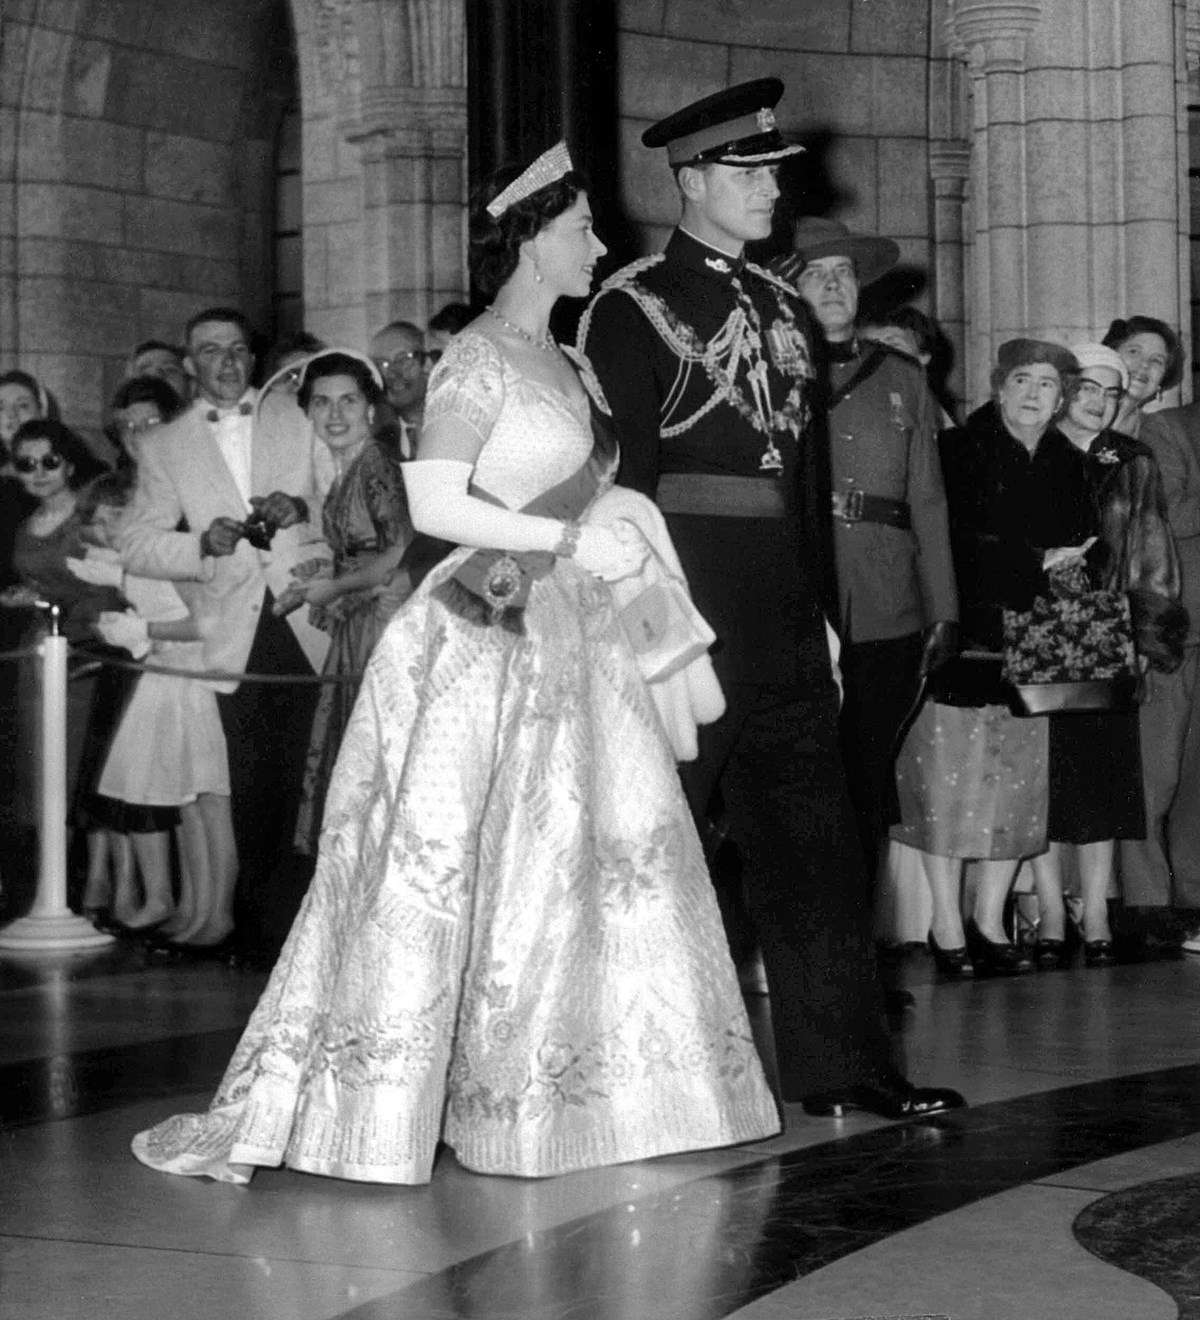 Queen Elizabeth and Prince Philip enter Centre Block for the opening of Parliament in 1957. The Queen wears her 1953 coronation gown and Prince Philip wears the uniform of a colonel-in-chief of the Royal Canadian Regiment. (Photo credit: The Canadian Press)